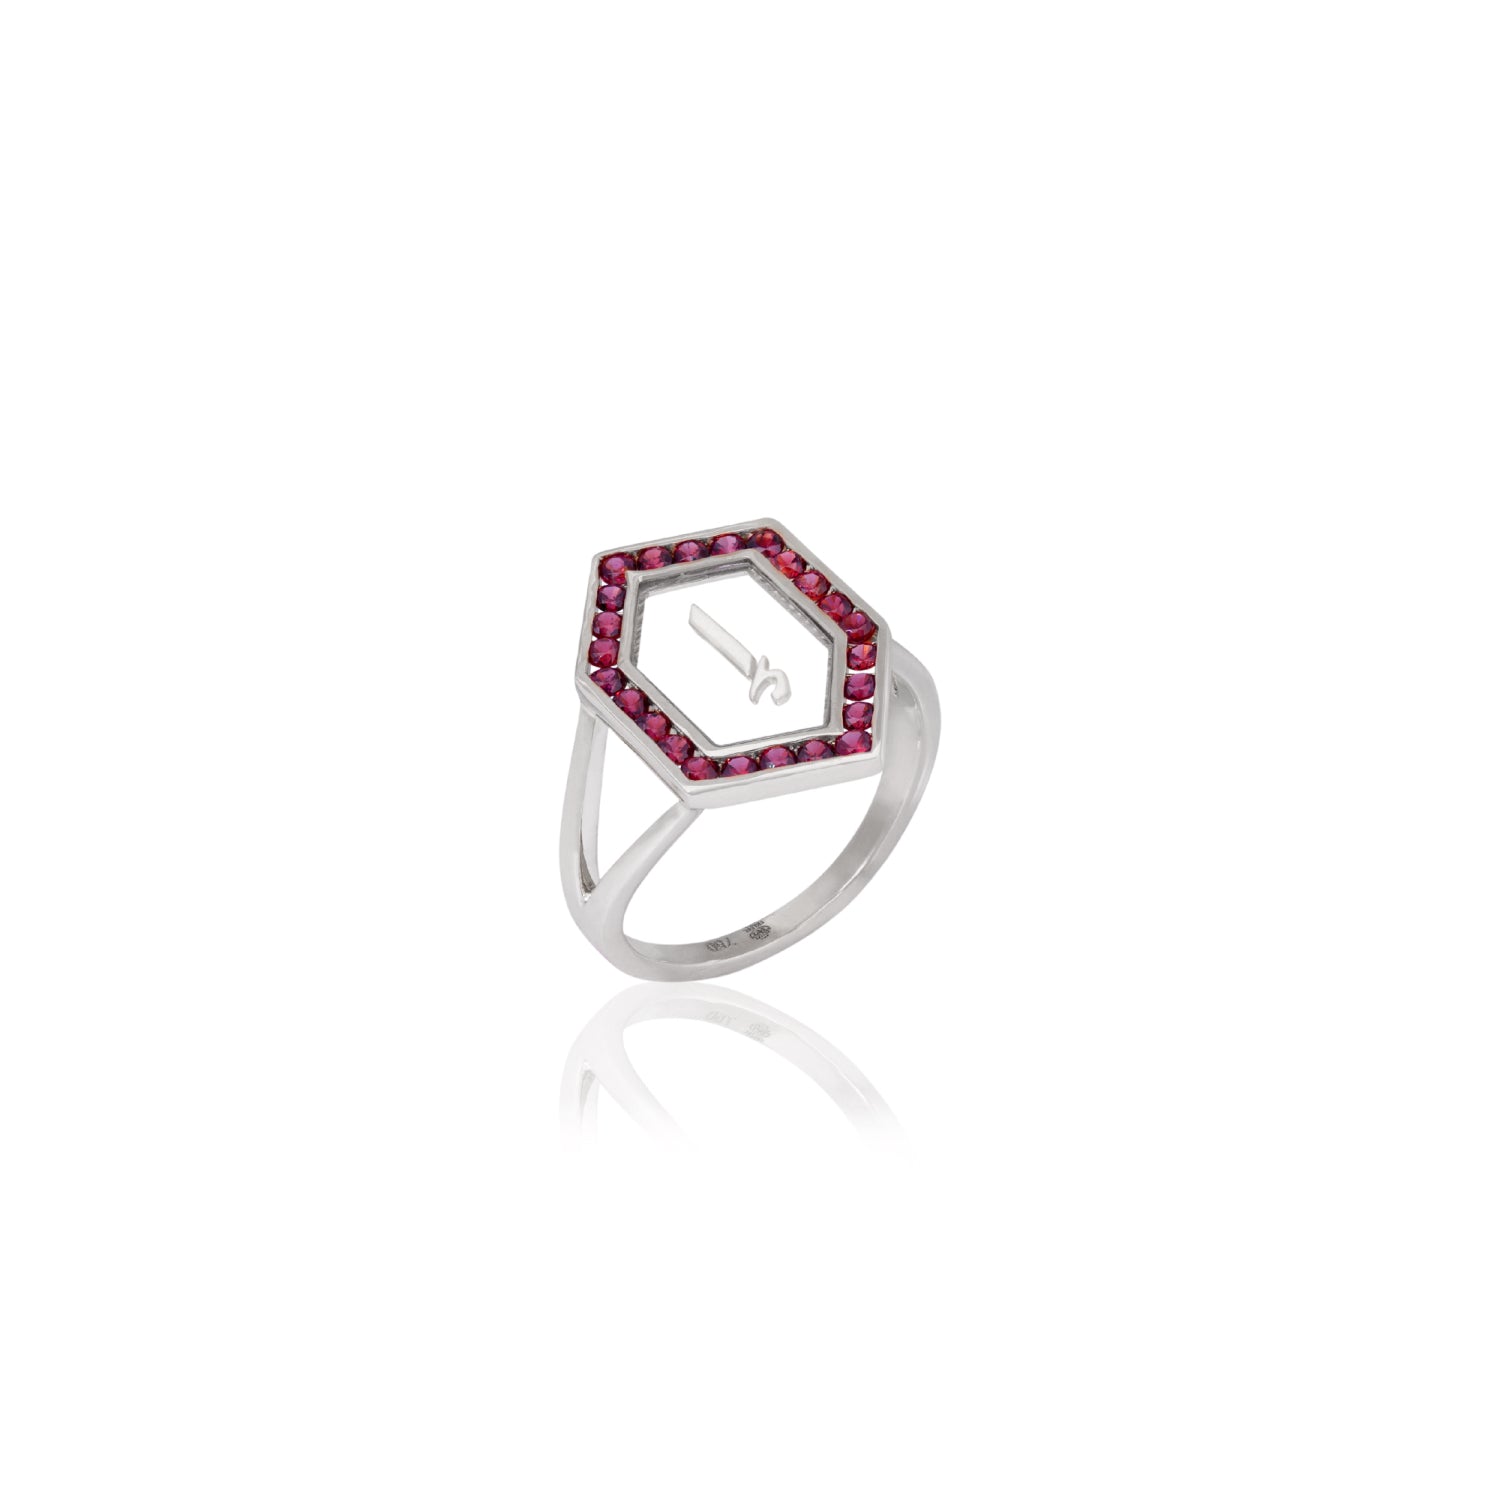 Qamoos 1.0 Letter إ Ruby Ring in White Gold